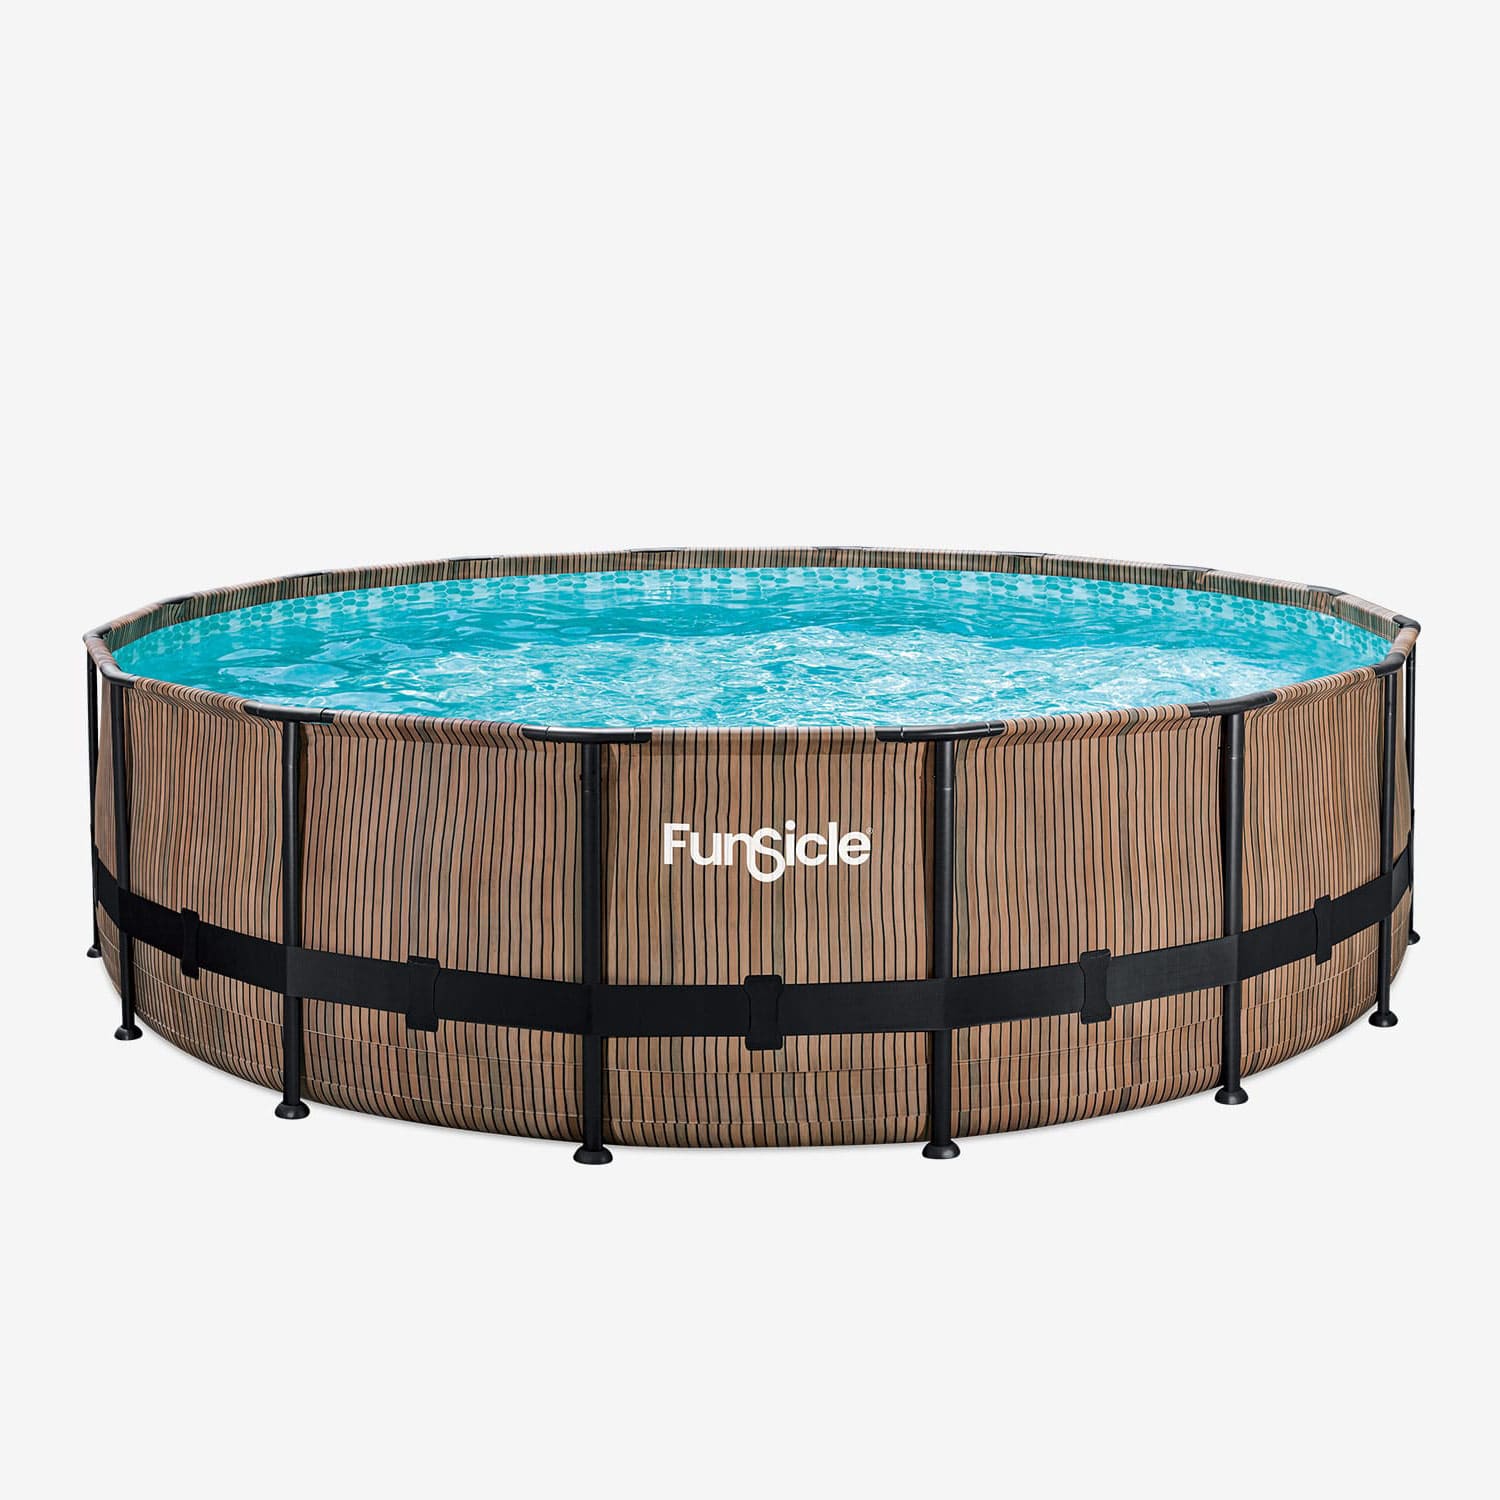 Funsicle 16 ft Oasis Designer Pool - Natural Teak without people